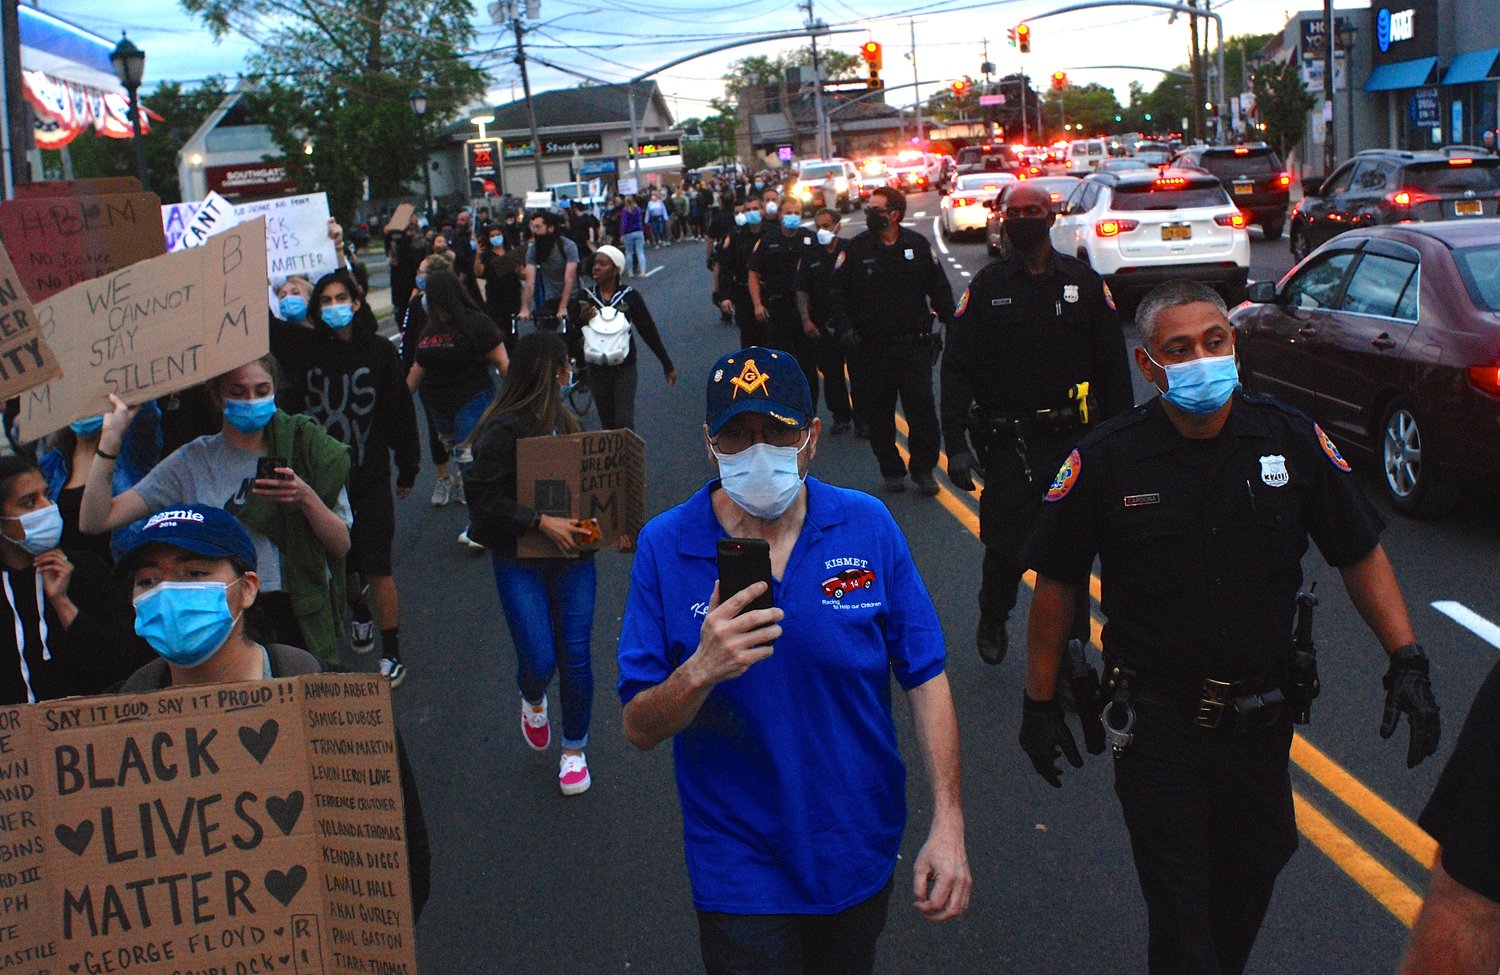 The protest shut down Merrick Road when demonstrators began to march.